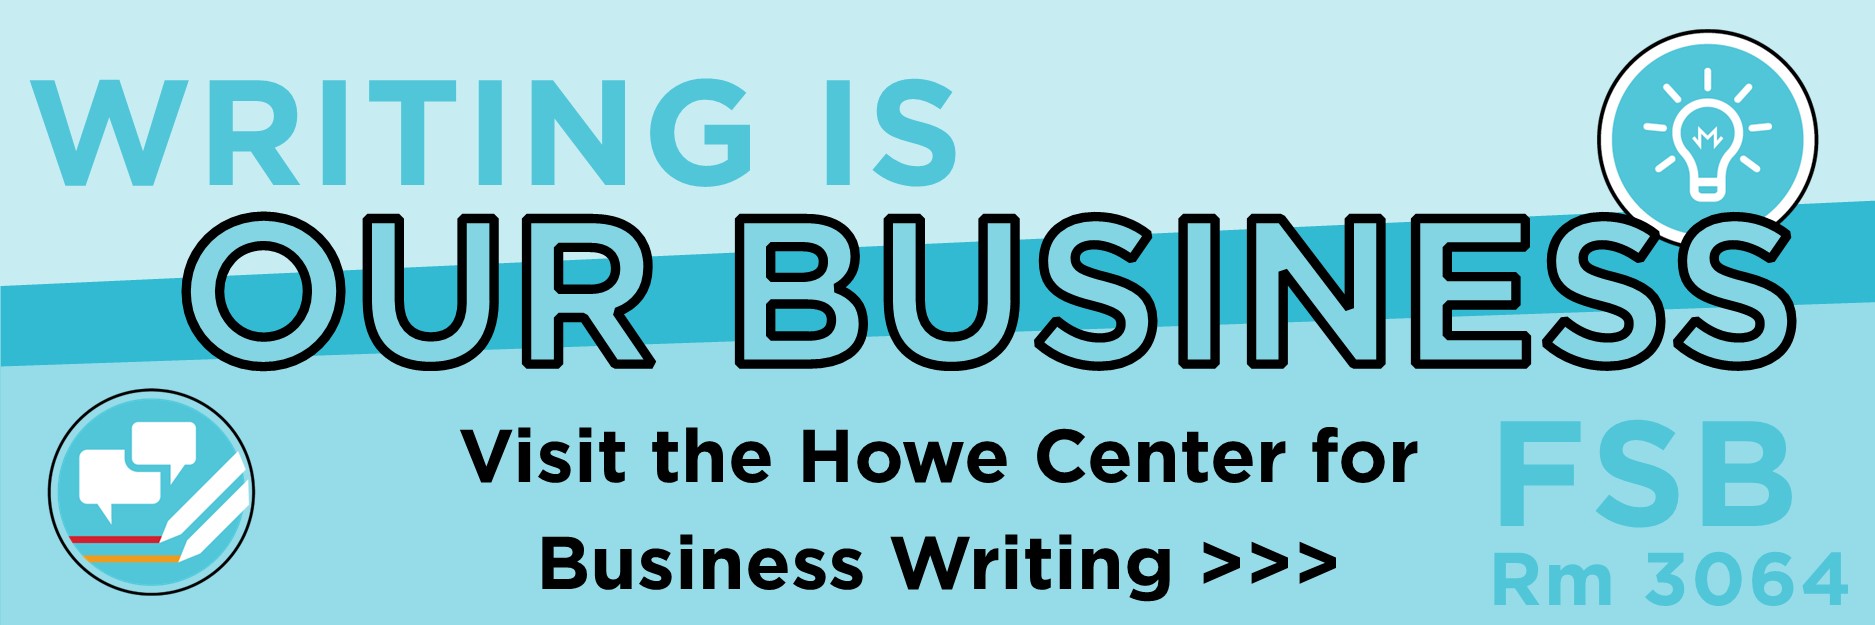 The Howe Center for Business Writing offers support to writers at the Farmer School of Business.